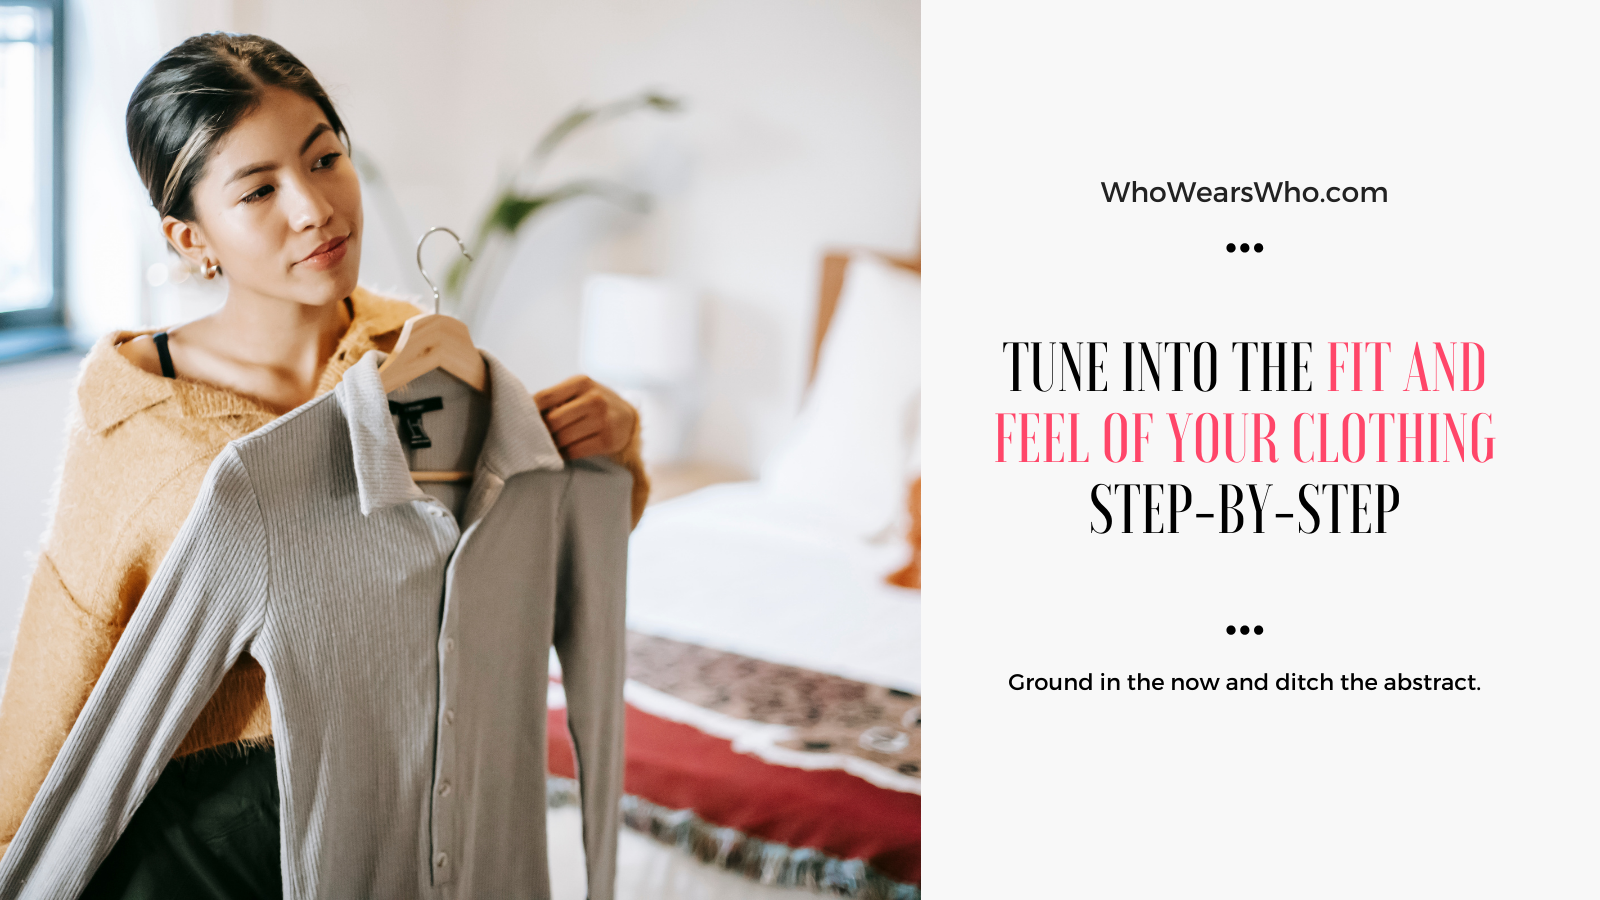 Tune into the fit and feel of your clothing step-by-step Twitter